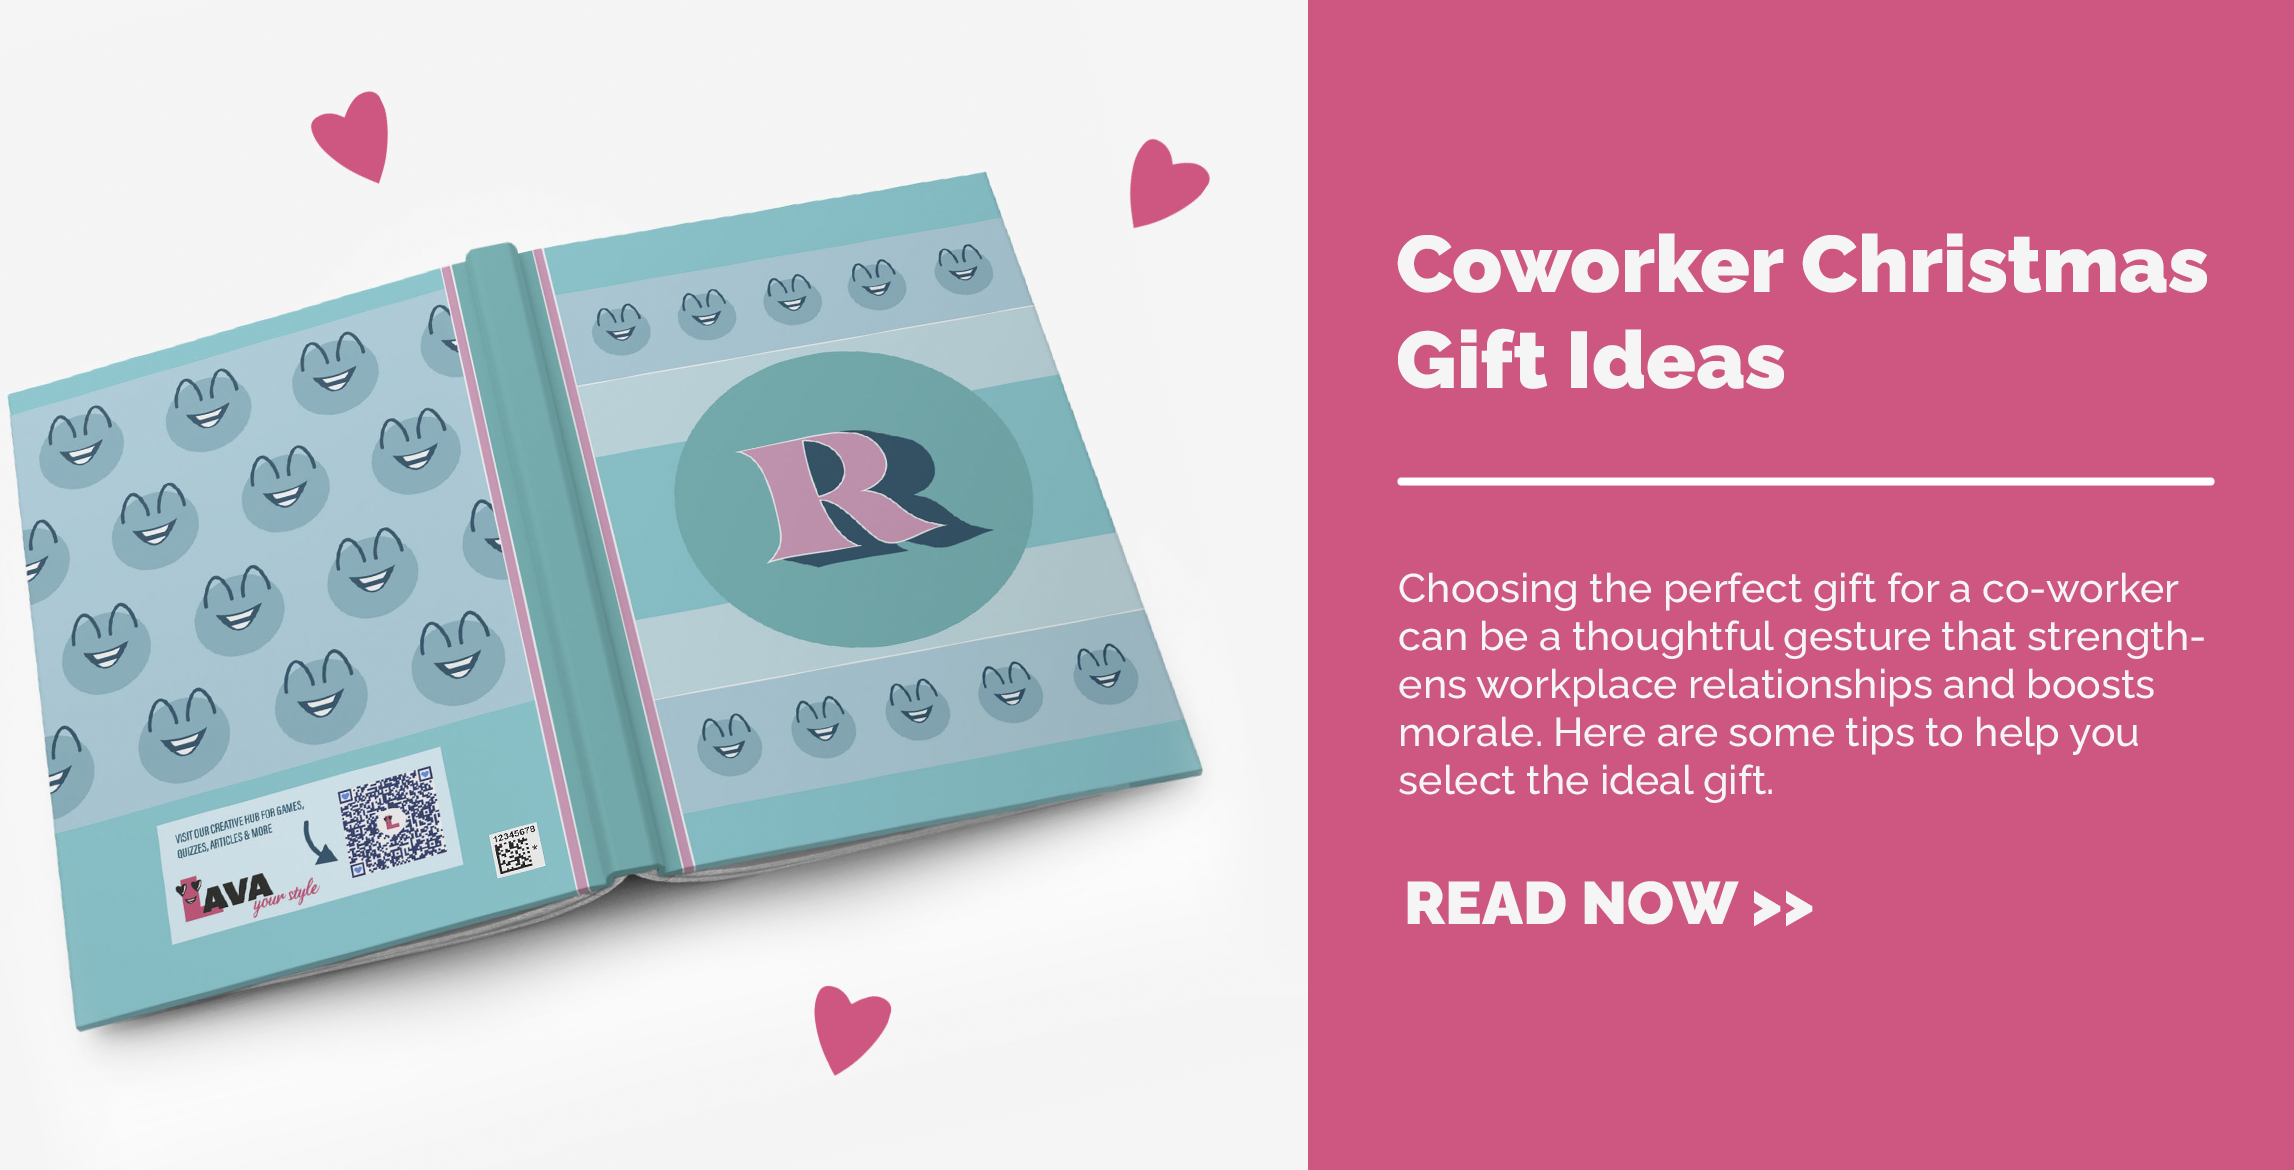 Coworker Christmas Gift Ideas: What to Buy your Coworkers this Christmas